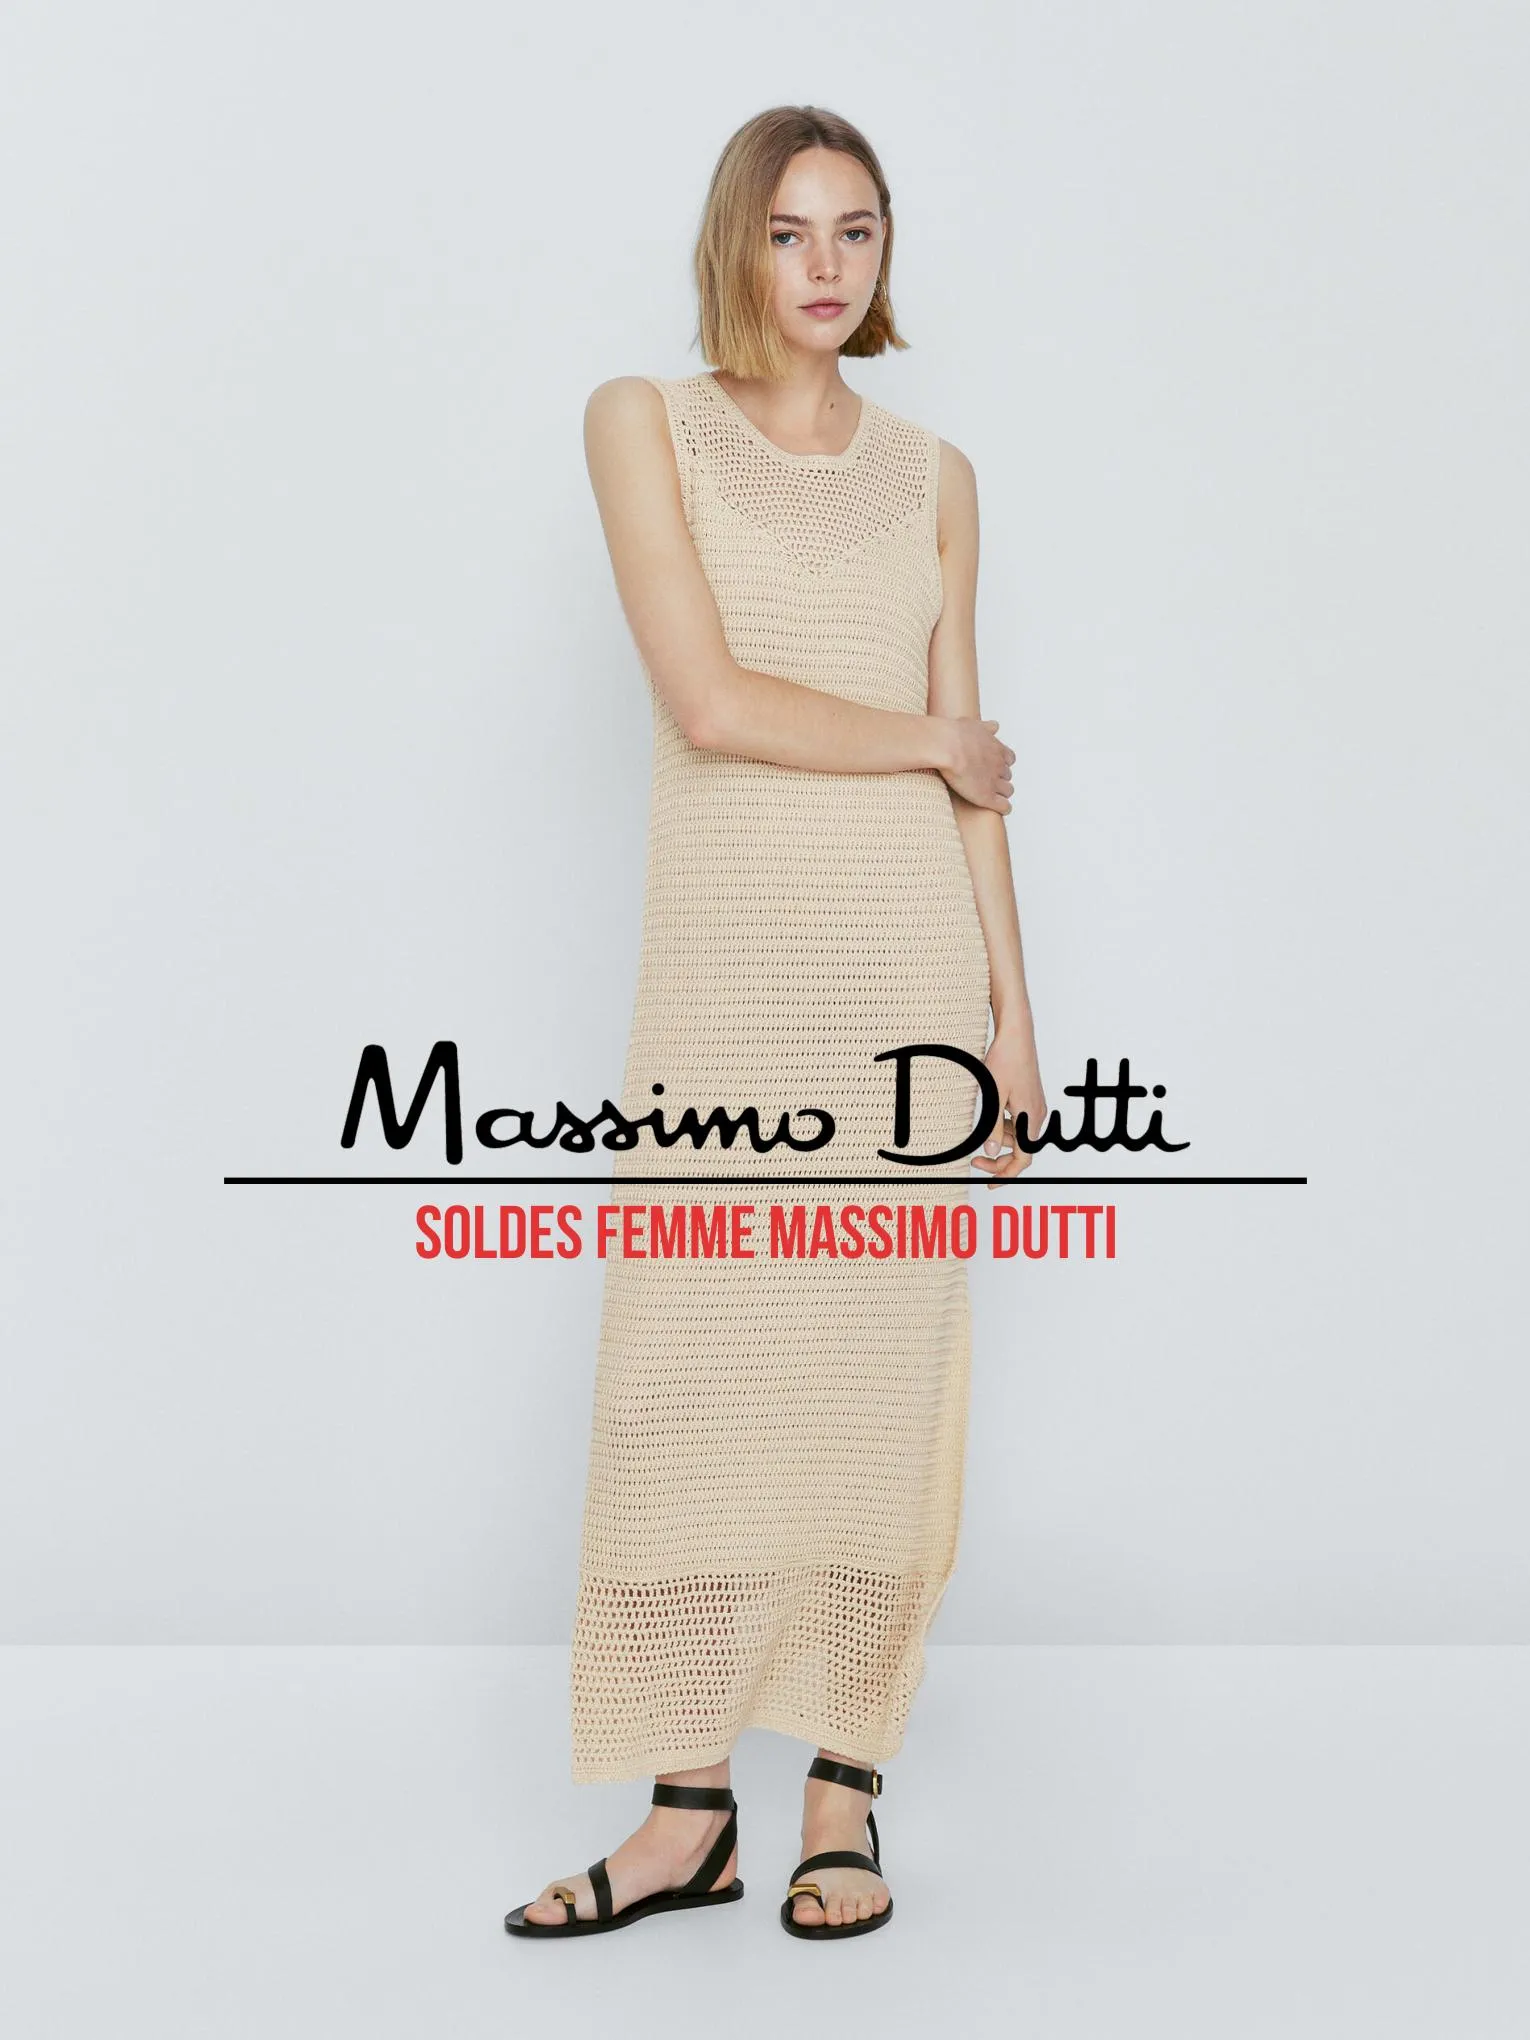 Catalogue Soldes Femme Massimo Dutti , page 00001